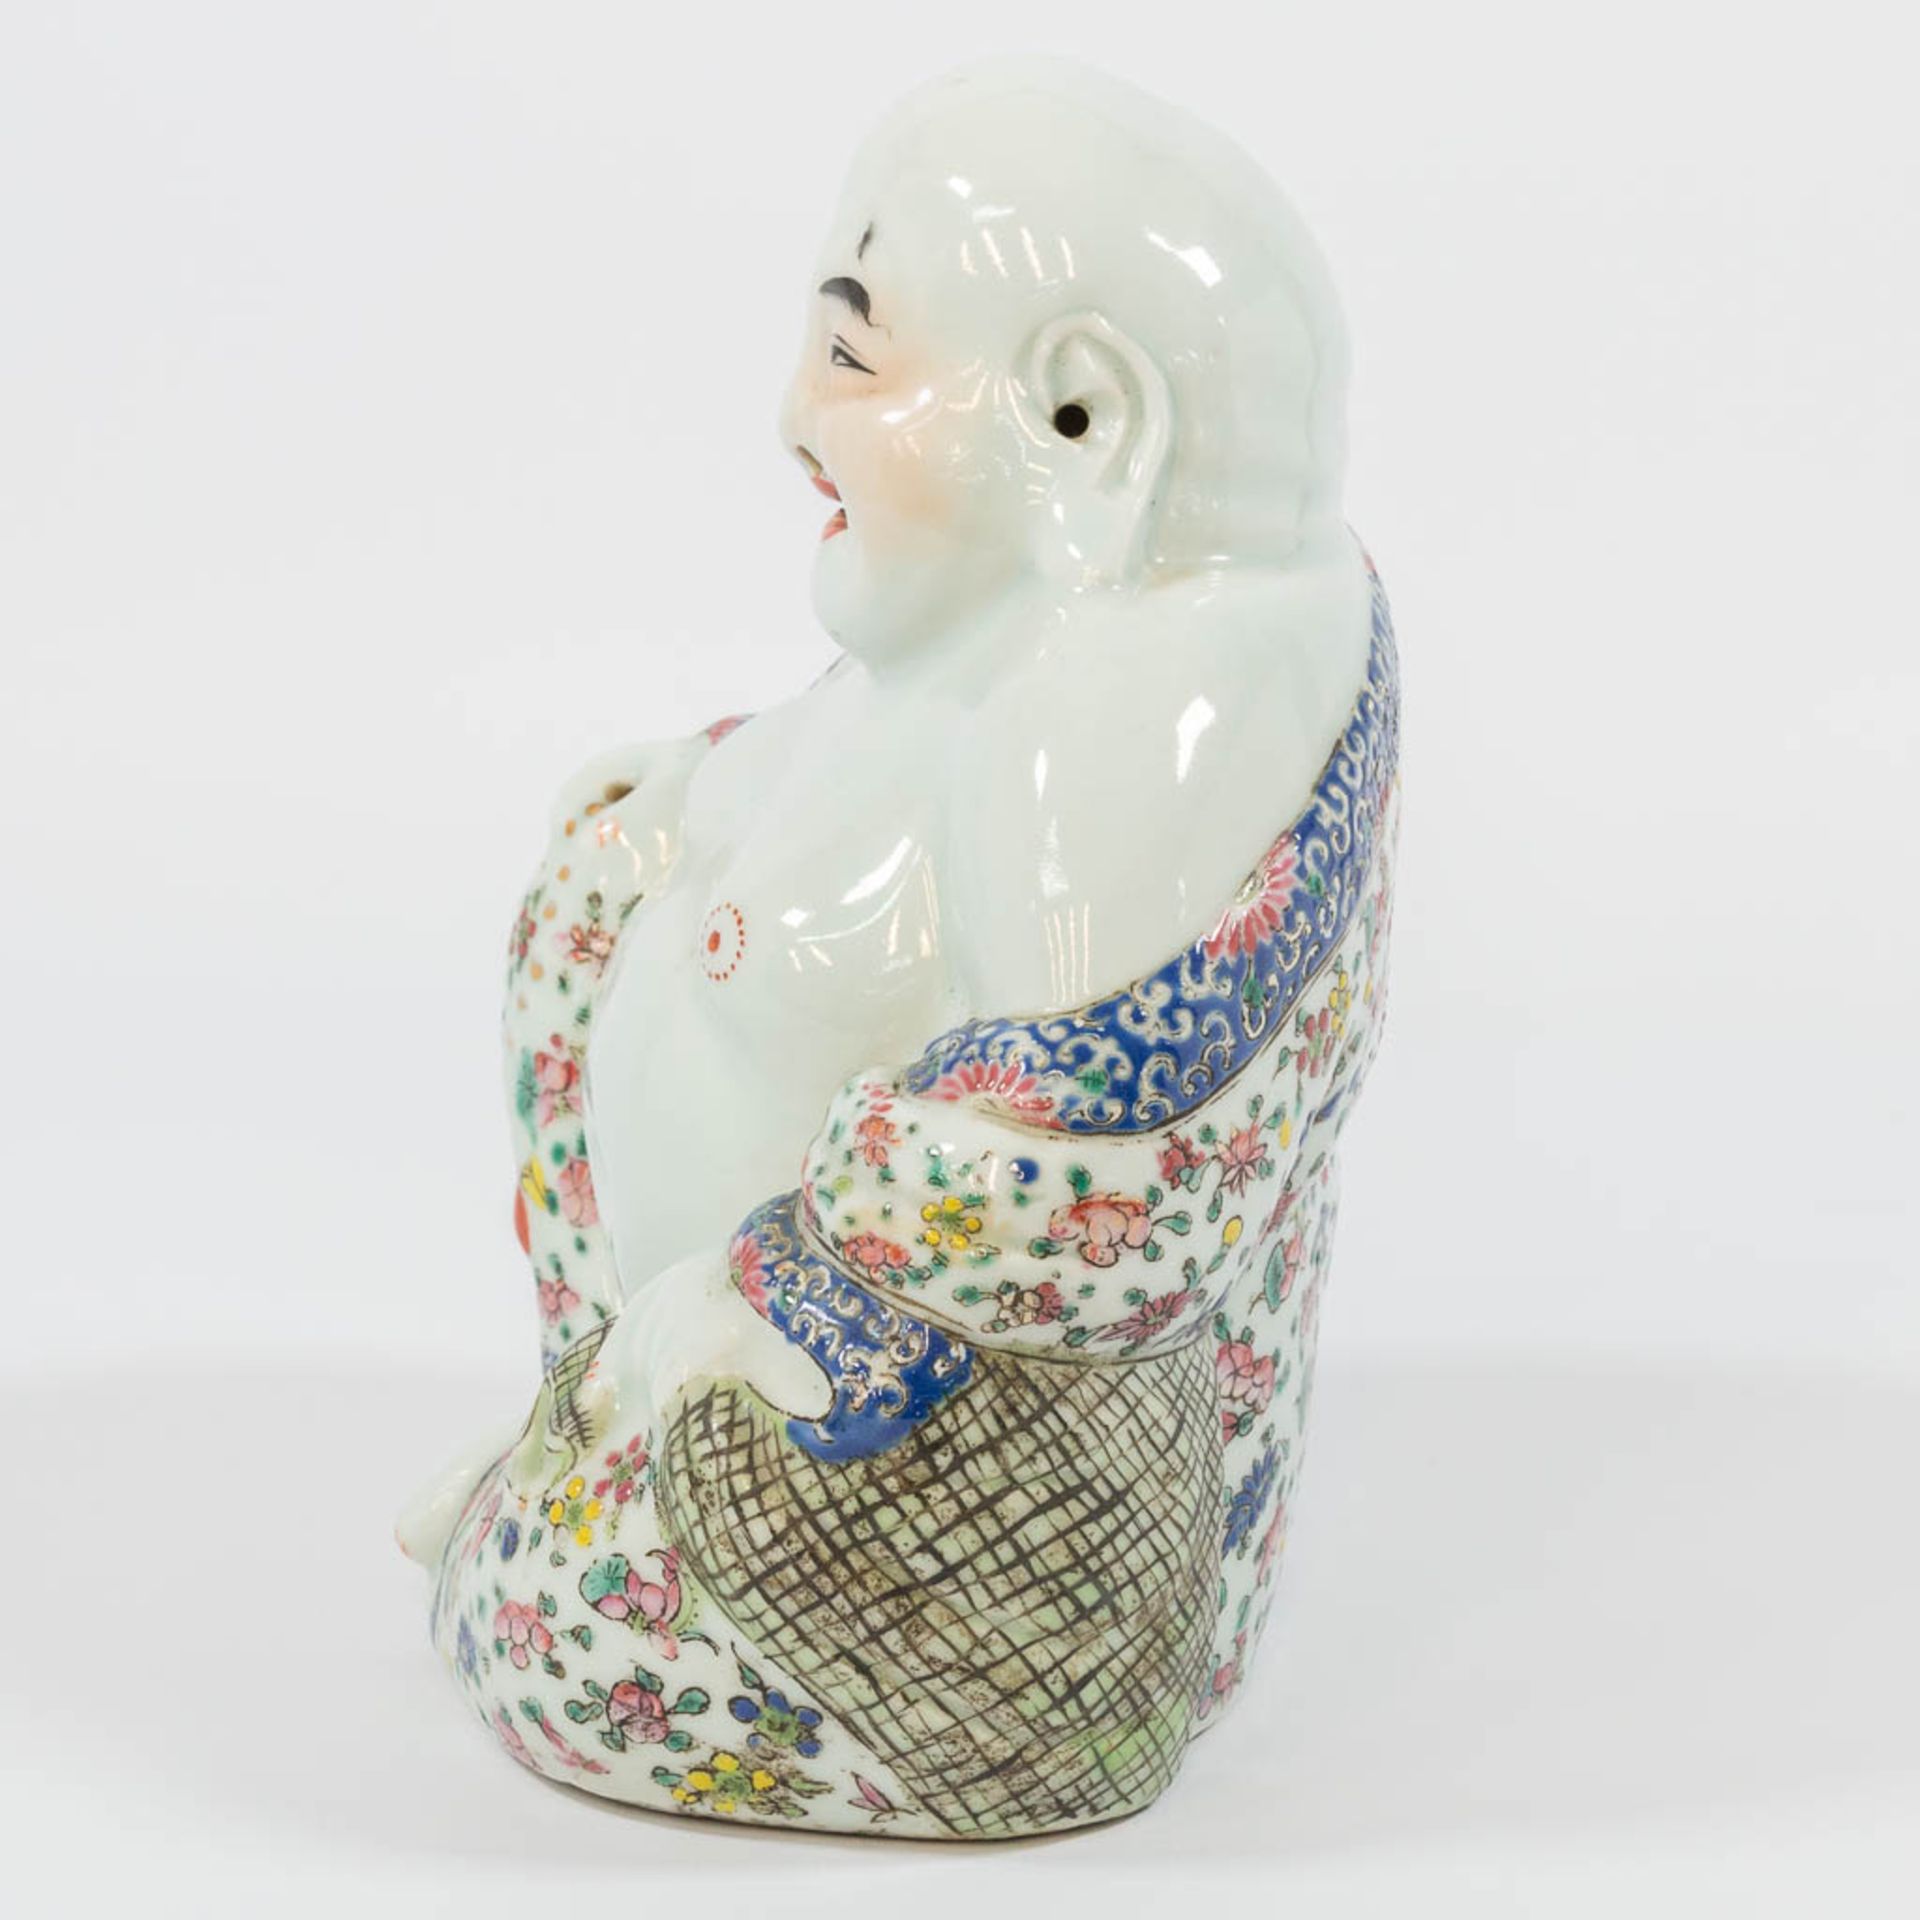 A Chinese laughing buddha, made of porcelain. - Image 3 of 27